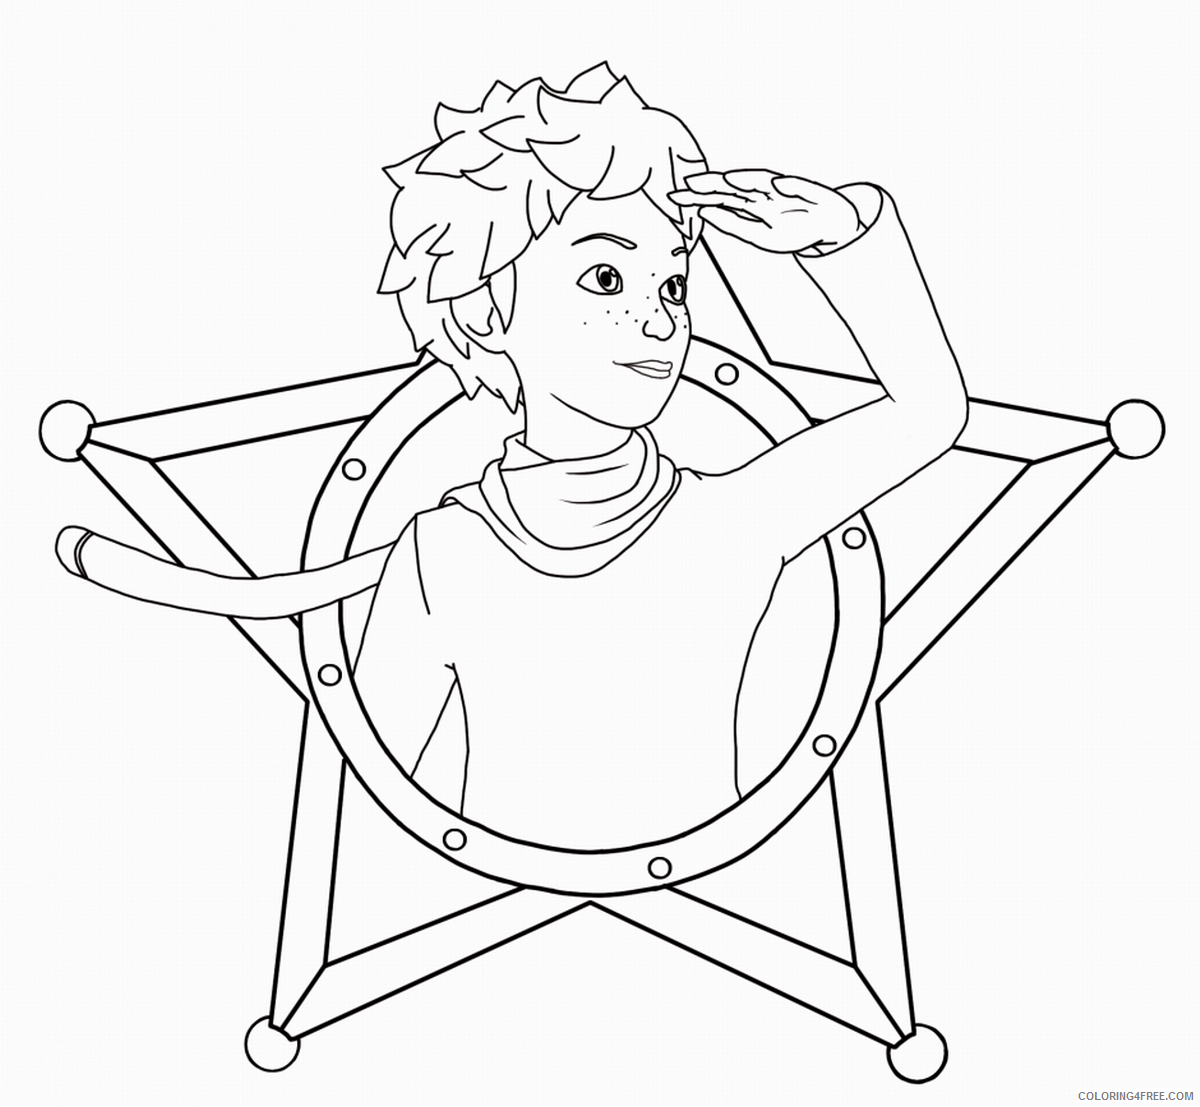 The Little Prince Coloring Pages Cartoons the_little_prince_coloring_10 Printable 2020 6457 Coloring4free